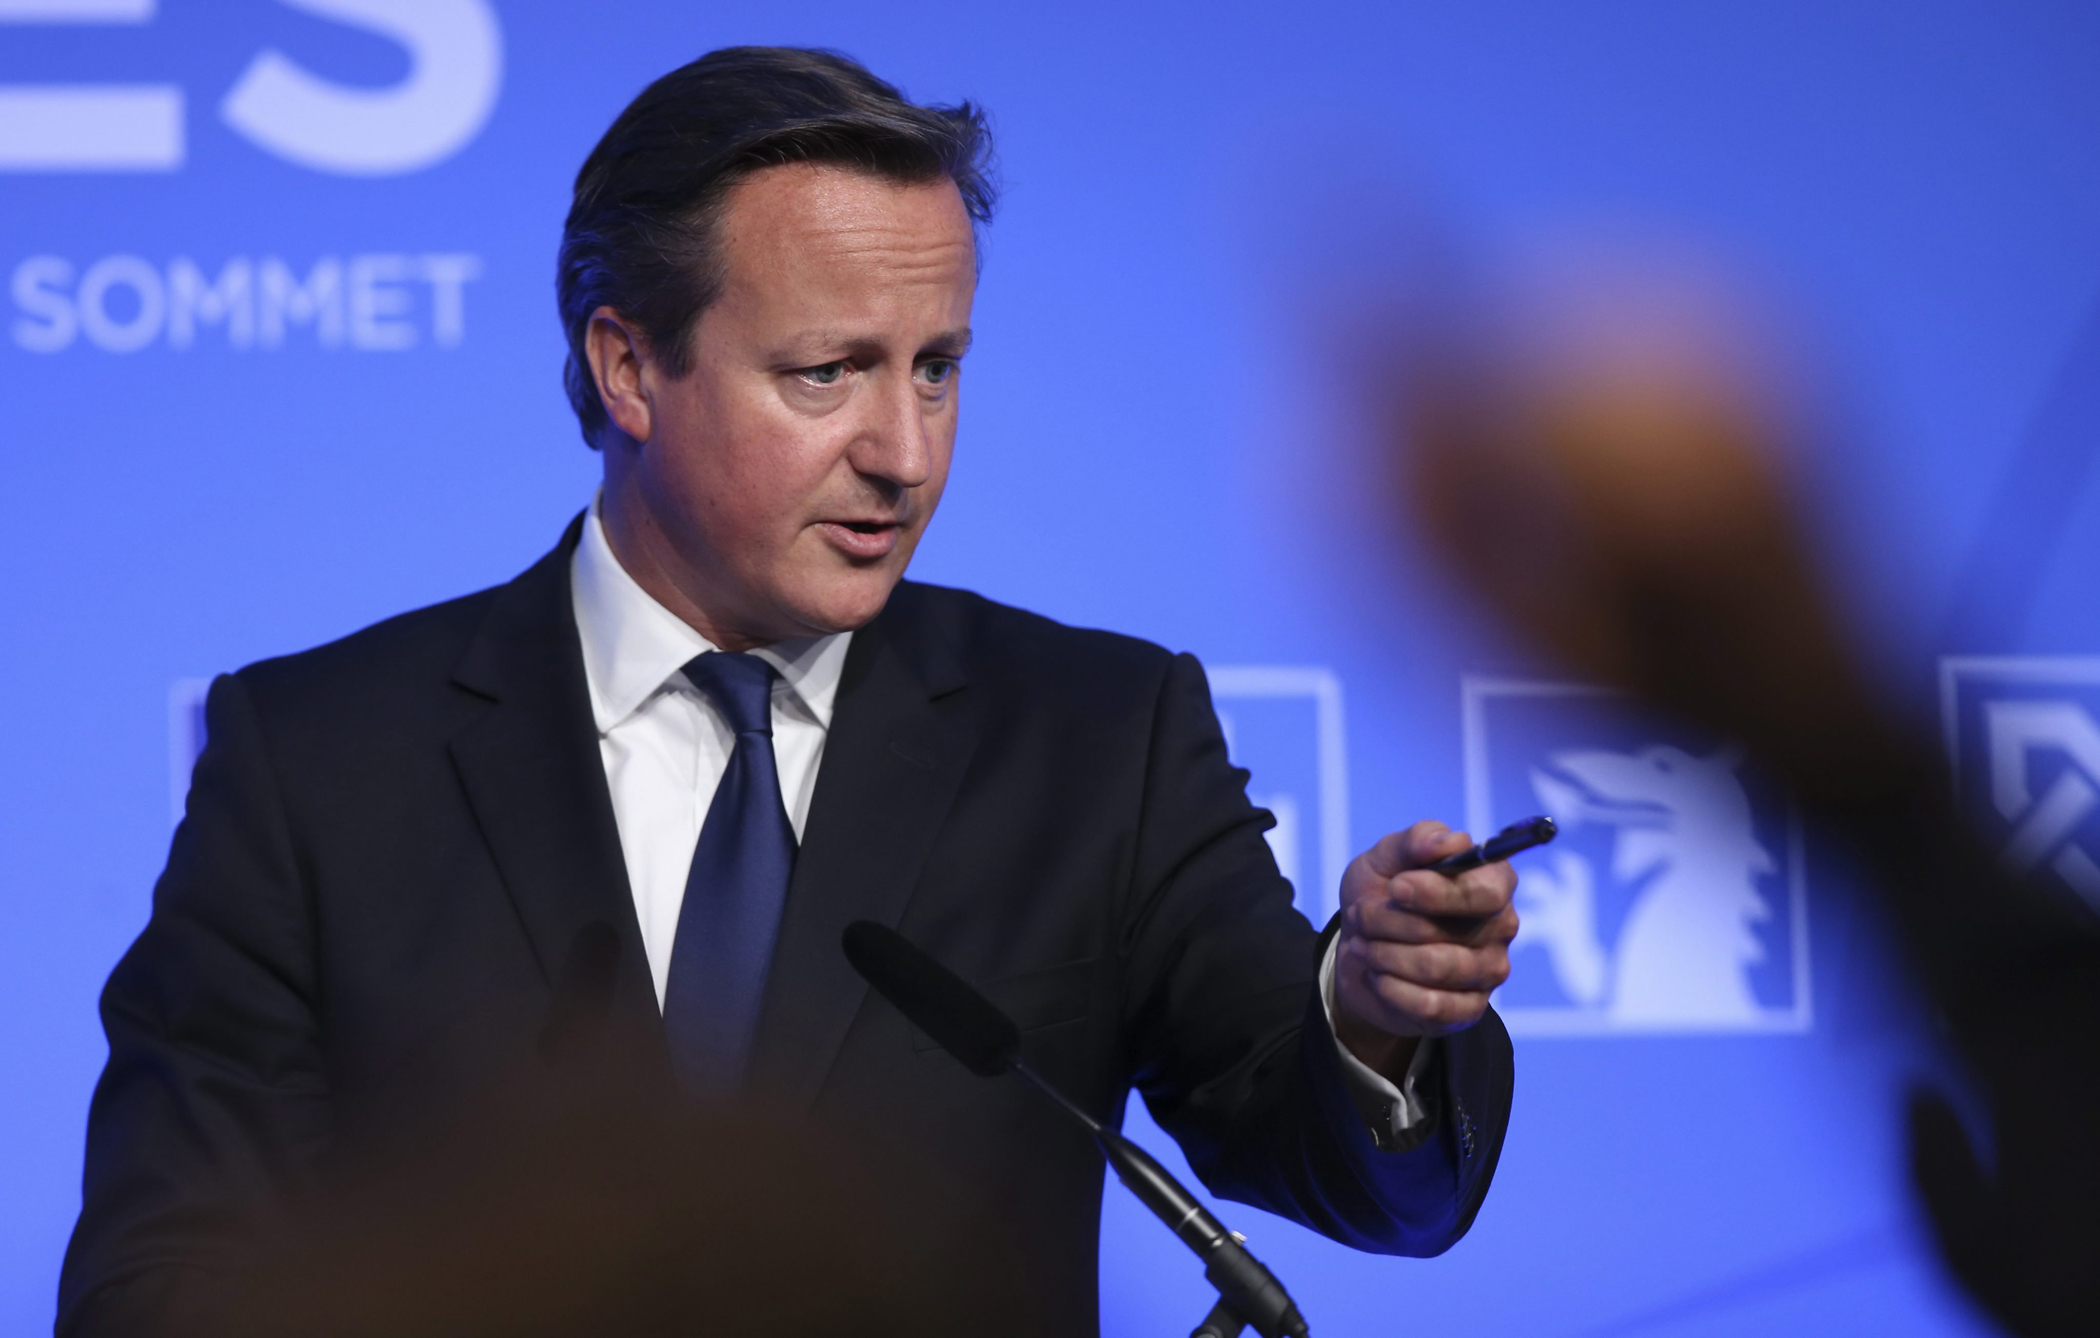 Prime Minister David Cameron speaks during a press conference as part of the NATO Summit 2014 at the Celtic Manor Resort in Newport, Wales, Sept. 5 2014. (Oliver Hoslet—EPA)